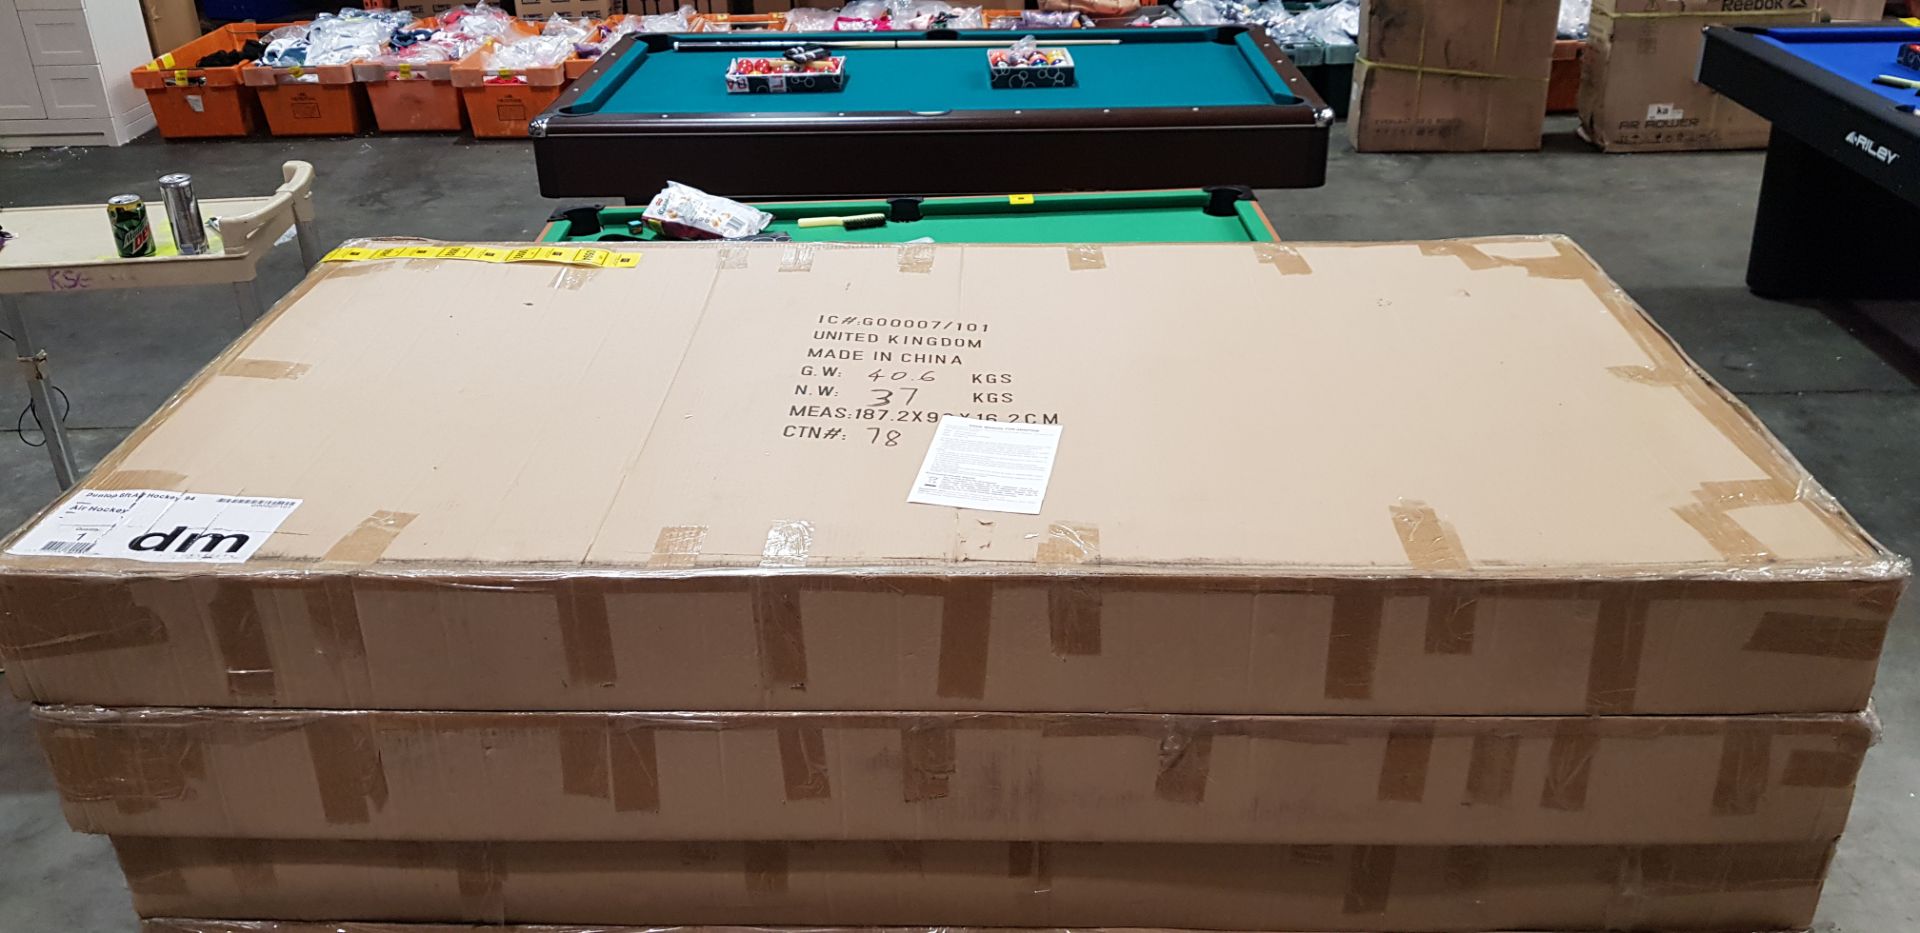 1 X BRAND NEW BOXED DUNLOP 6 FT AIR HOCKEY TABLE WITH 240 V FAN MOTOR - INCLUDES SCORER / PUSHERS - Image 2 of 2